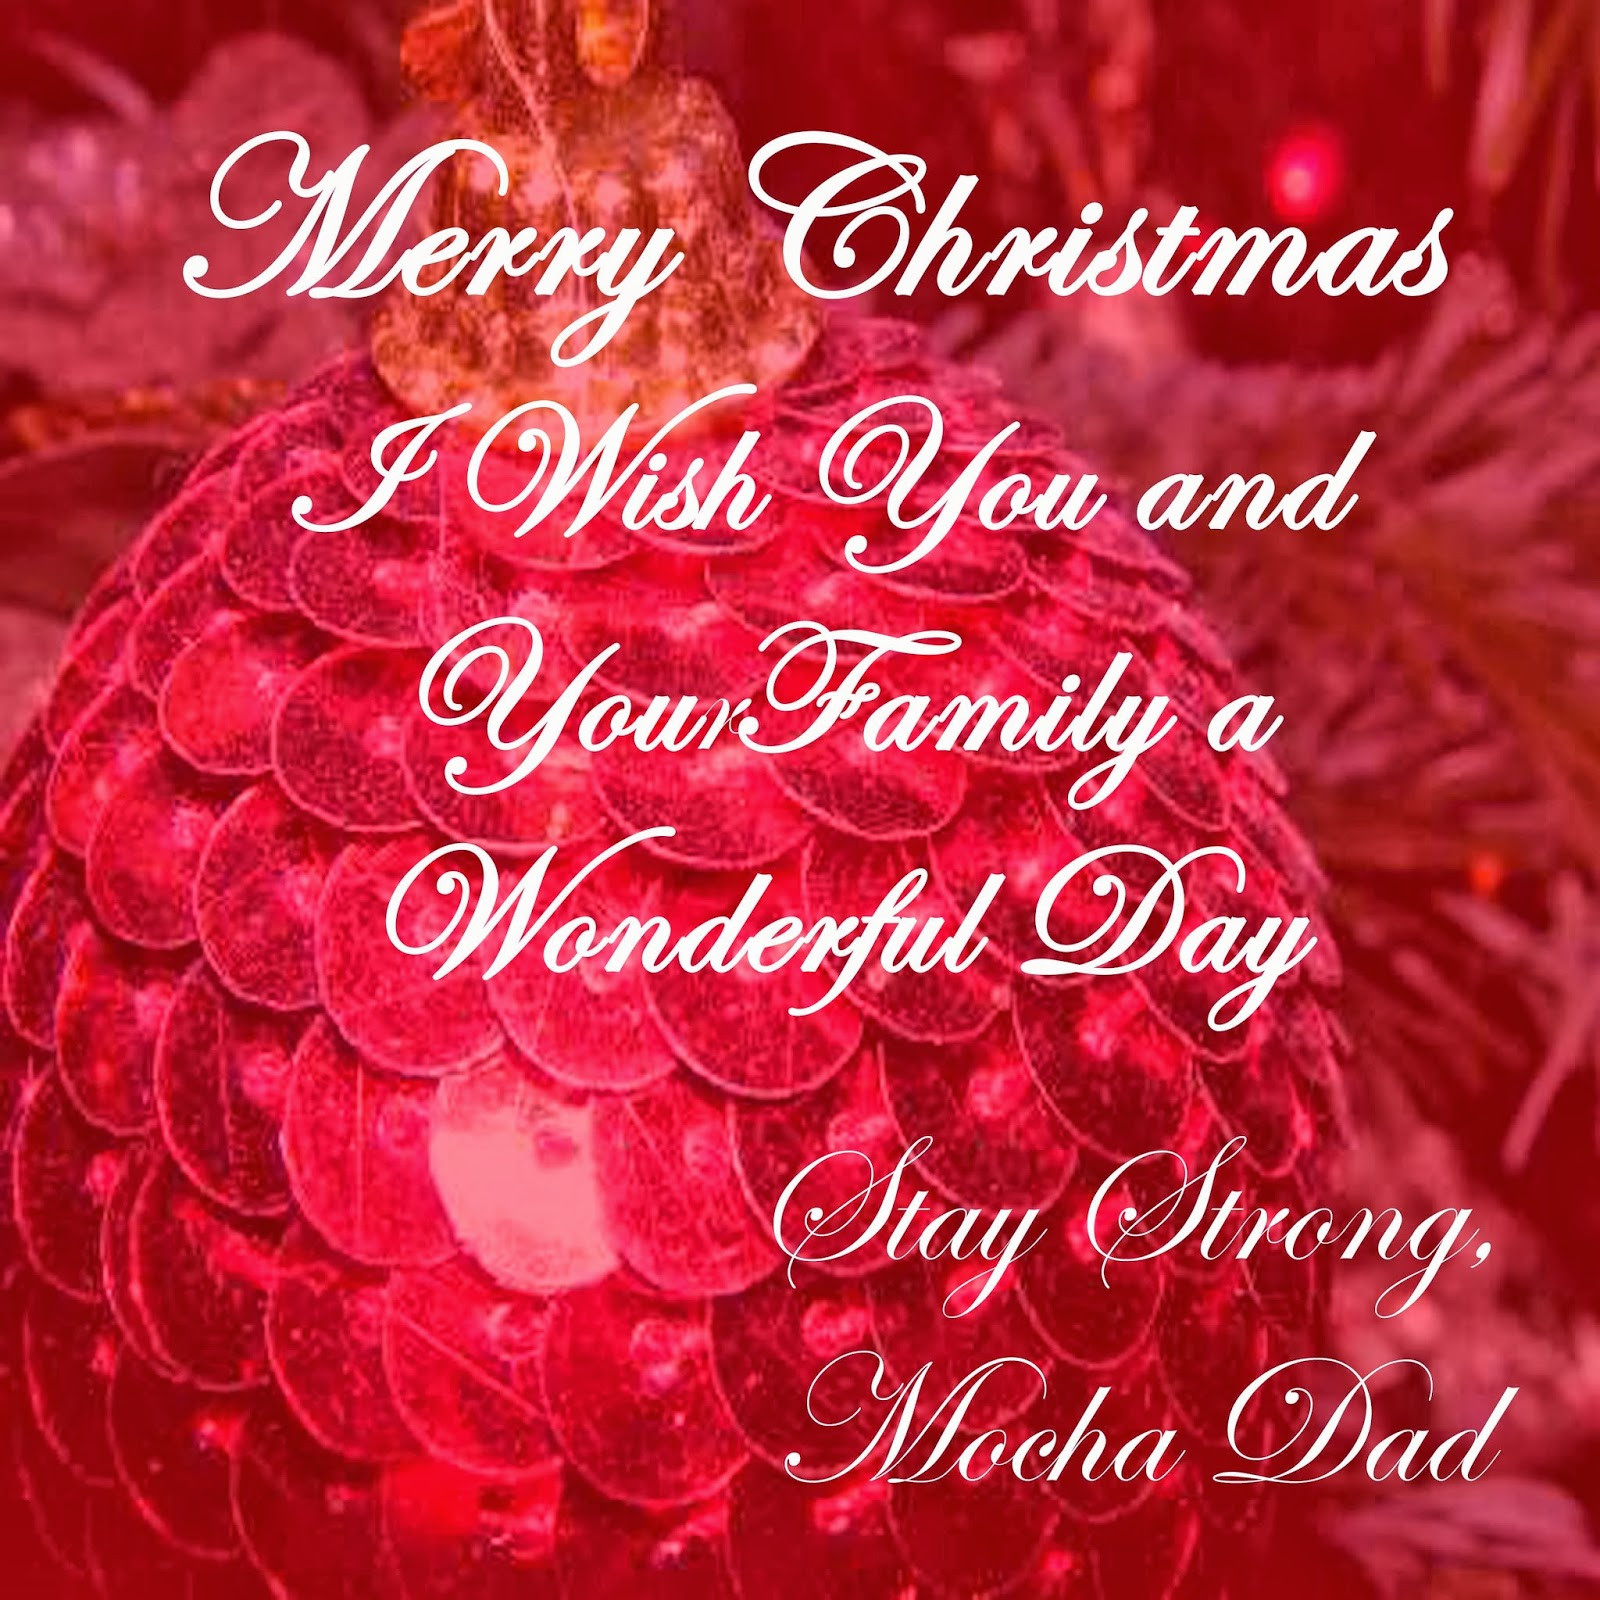 Christmas Pic And Quotes
 Top 20 Merry Christmas